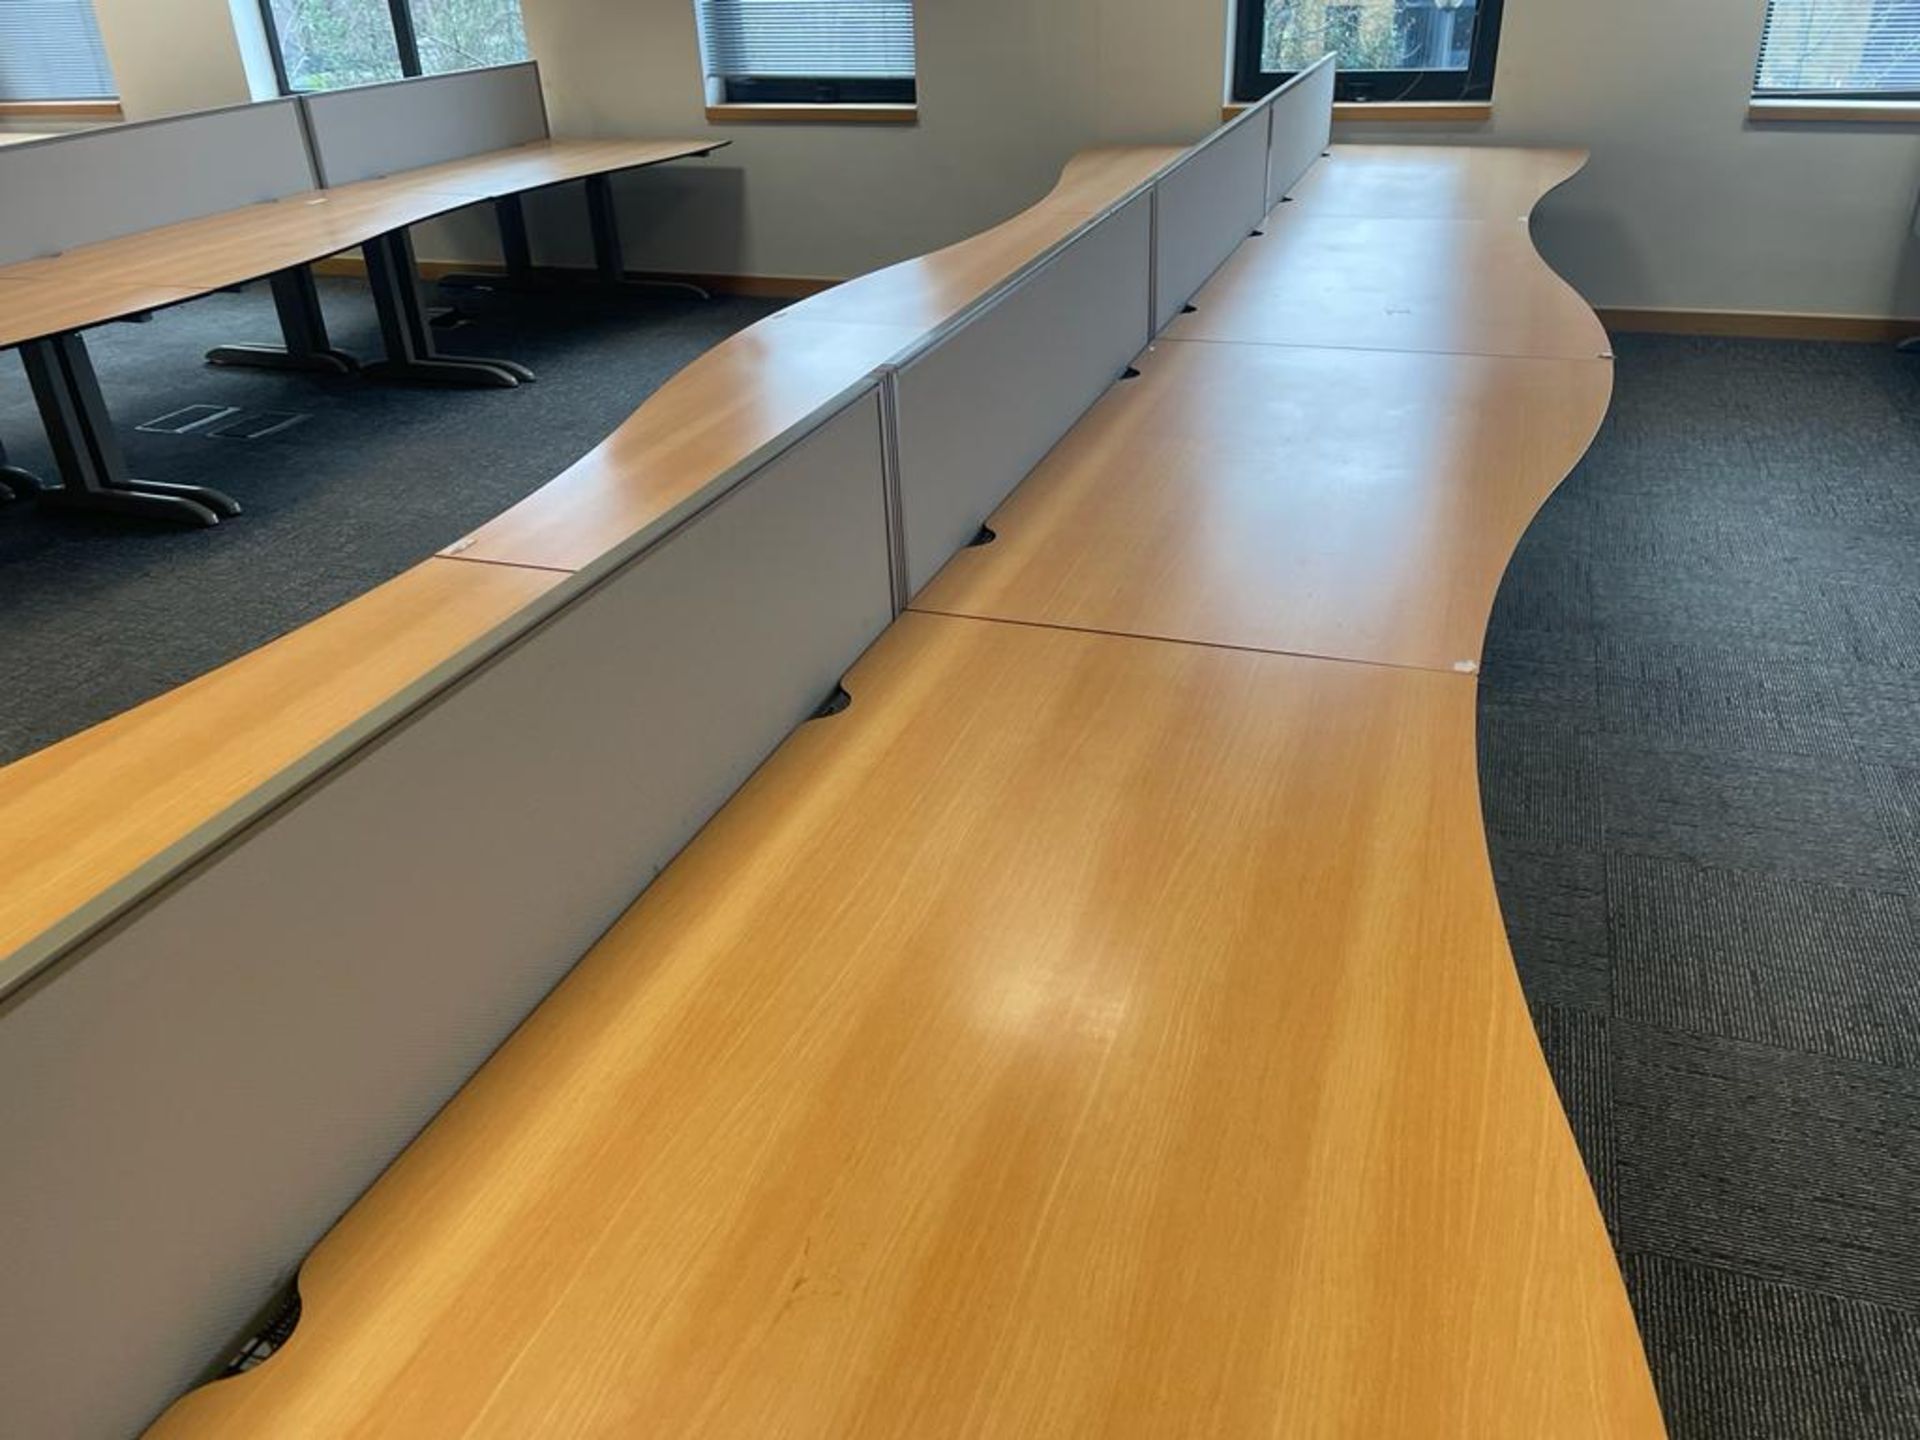 4 x Techo Wave Office Desks With Privacy Panels and Cable Tidy Cages - Beech Wood Finish - Image 3 of 17